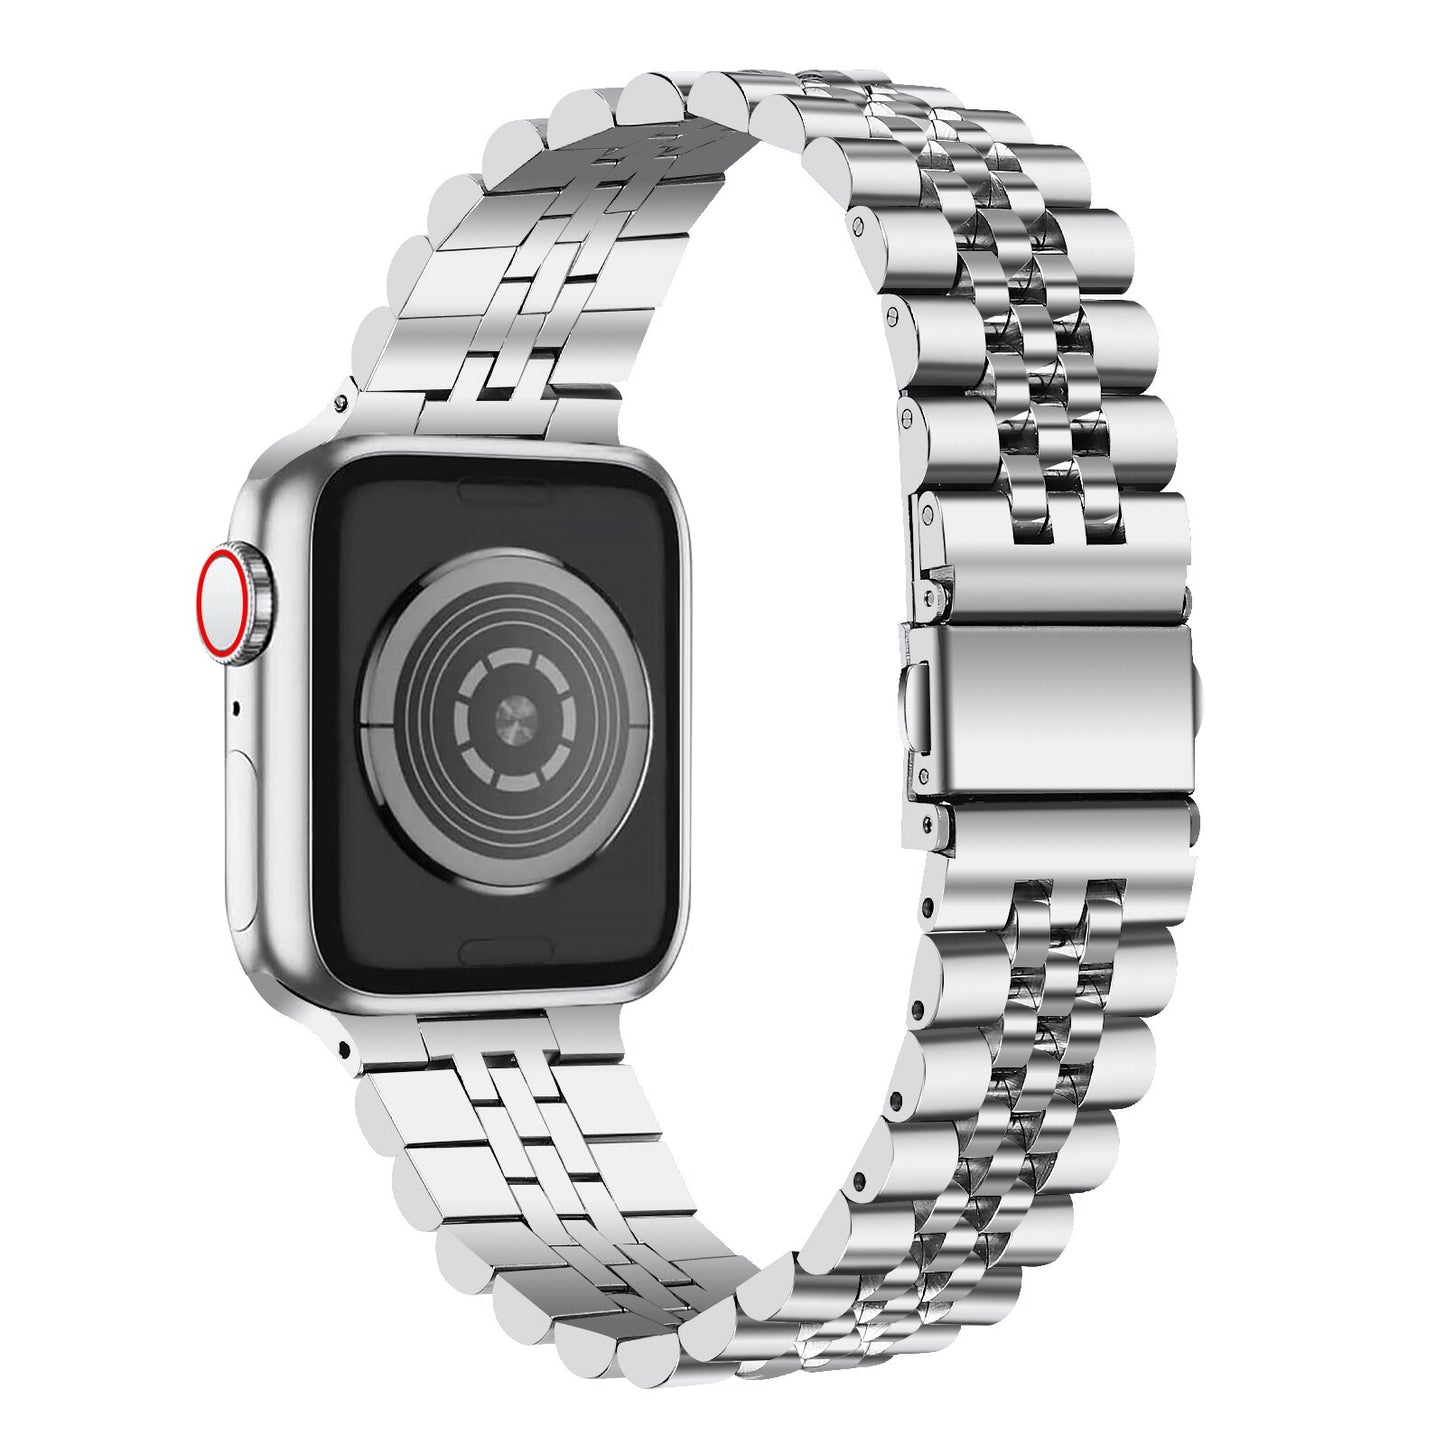 Slim Stainless Steel Apple Watch Band